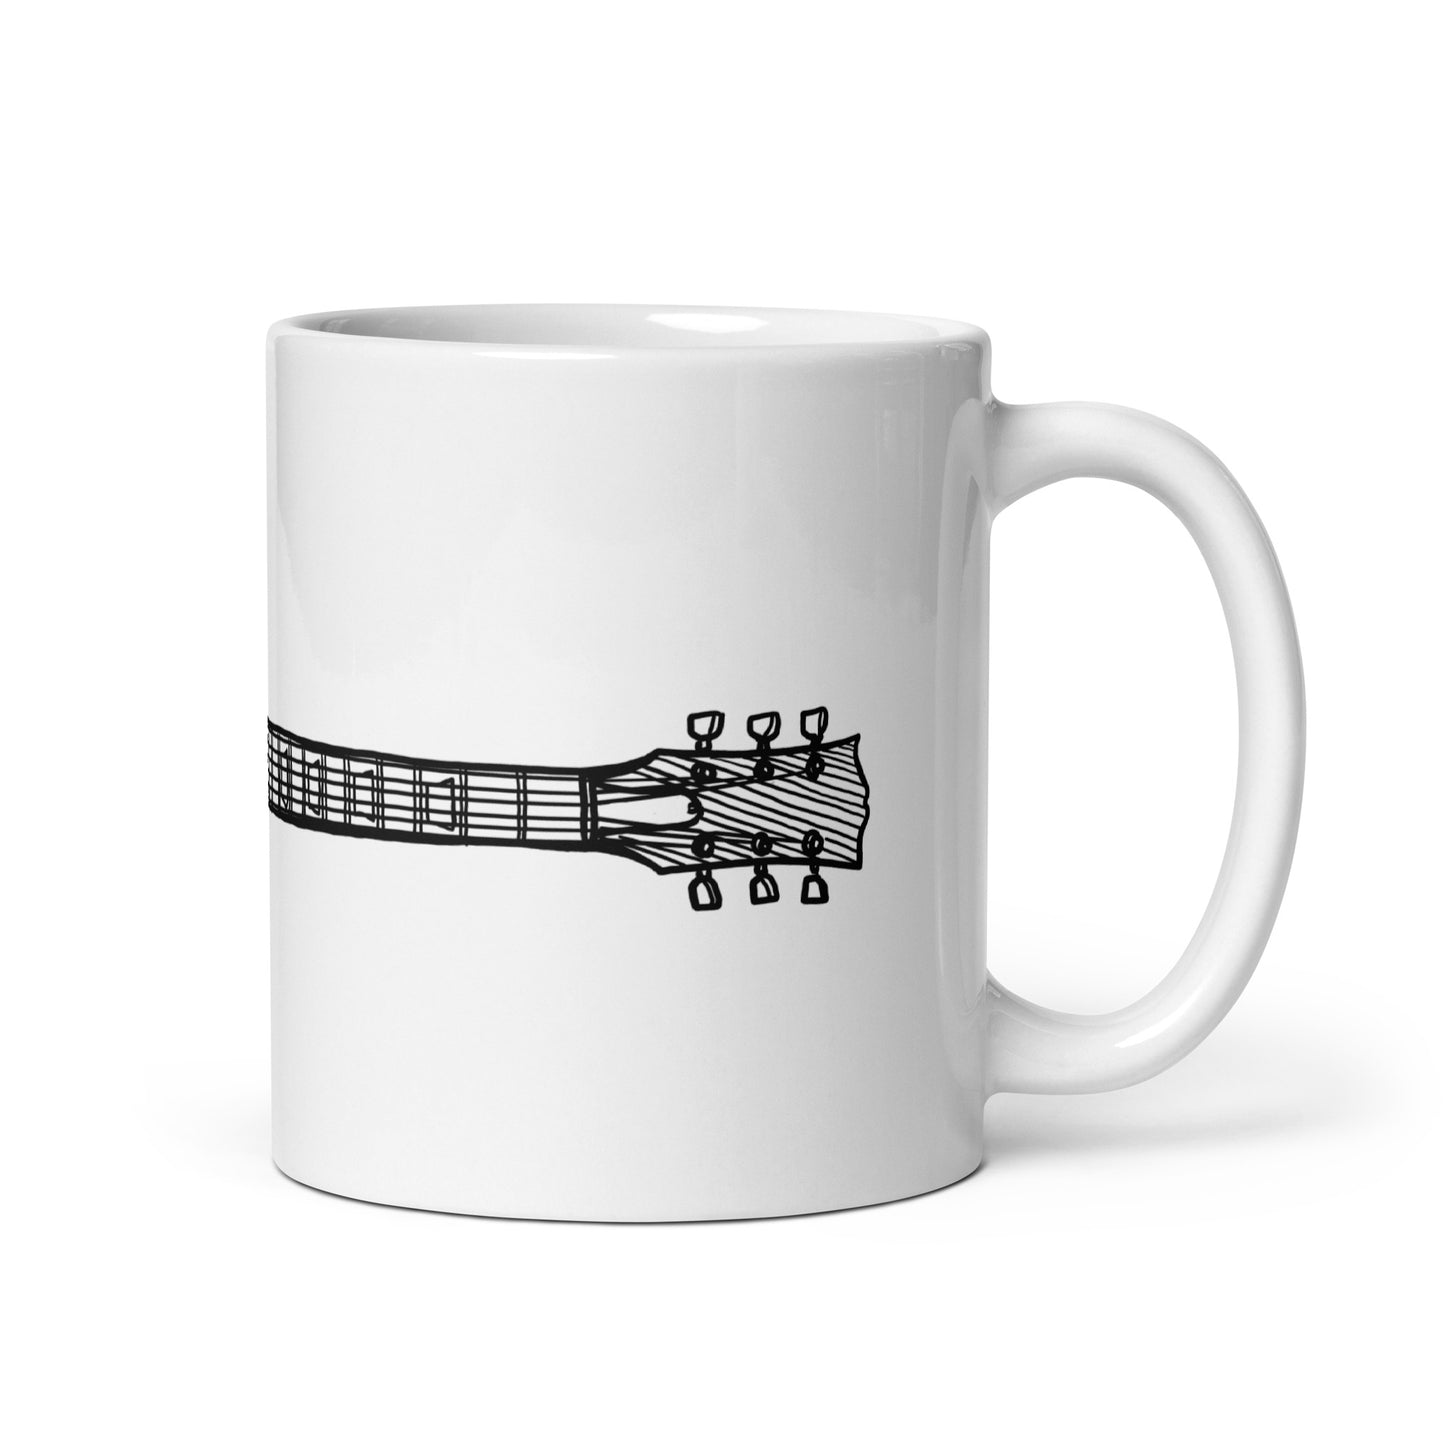 BellavanceInk: Coffee Mug With A Vintage Style Electric Guitar Style Musical Instrument Pen And Ink Drawing